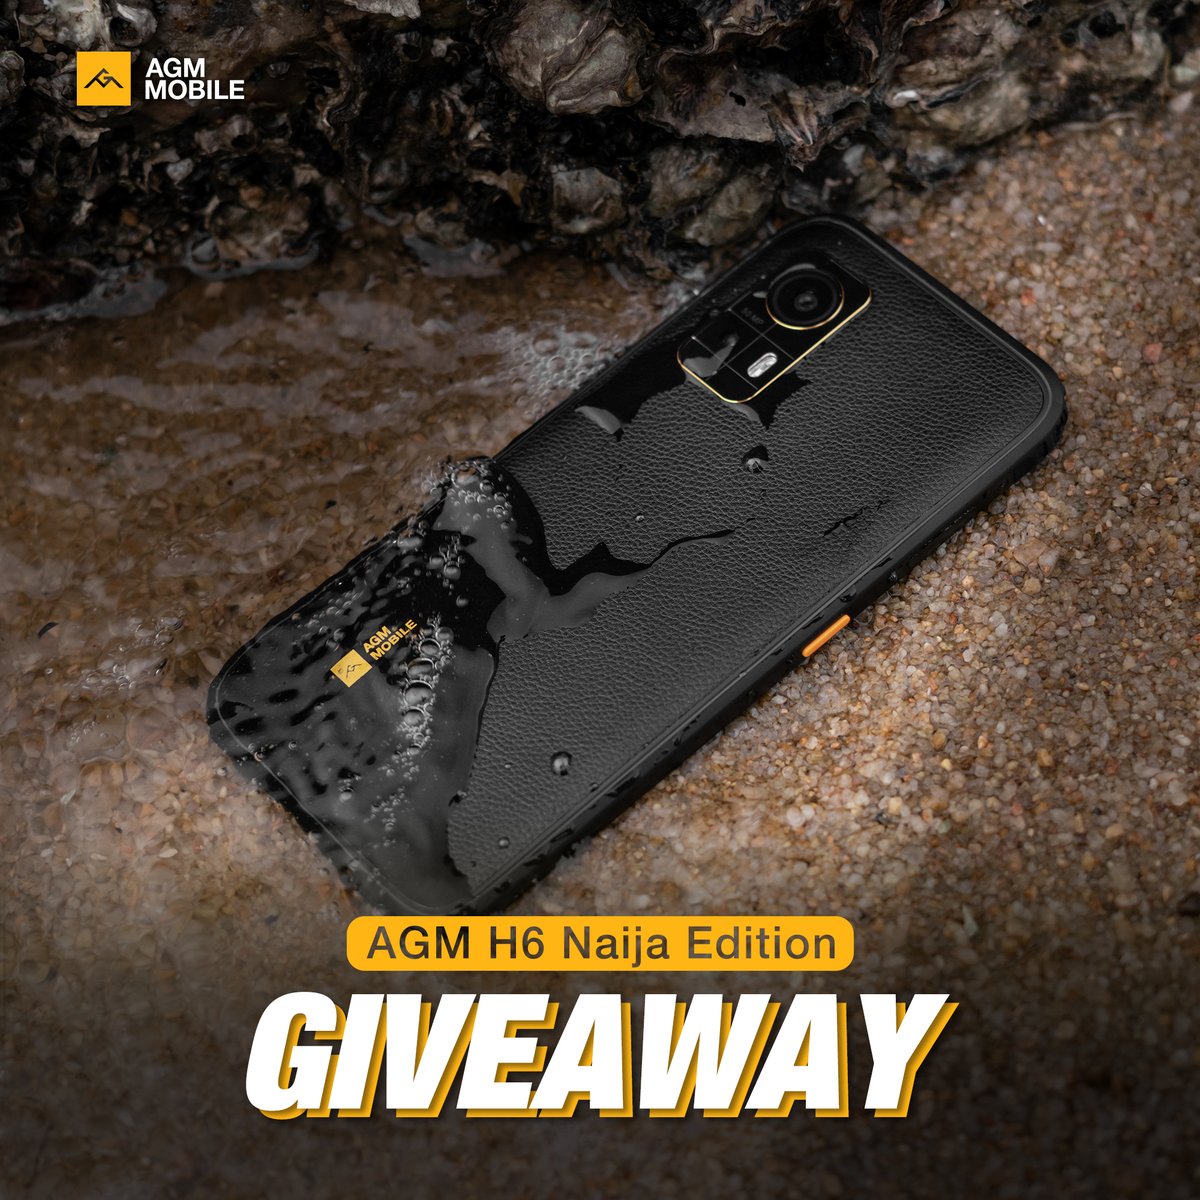 #Giveaway Time🎉 To celebrate our upcoming event on Jumia #Nigeria, we're giving away an AGM H6 Naija Edition 👉To Enter: 1️⃣ Follow us 2️⃣ Like this post & Retweet it. 3️⃣ Tag Two Friends in the comments. Winner announced on February 2 (Nigeria only) #AGMMobile #sweepstakes